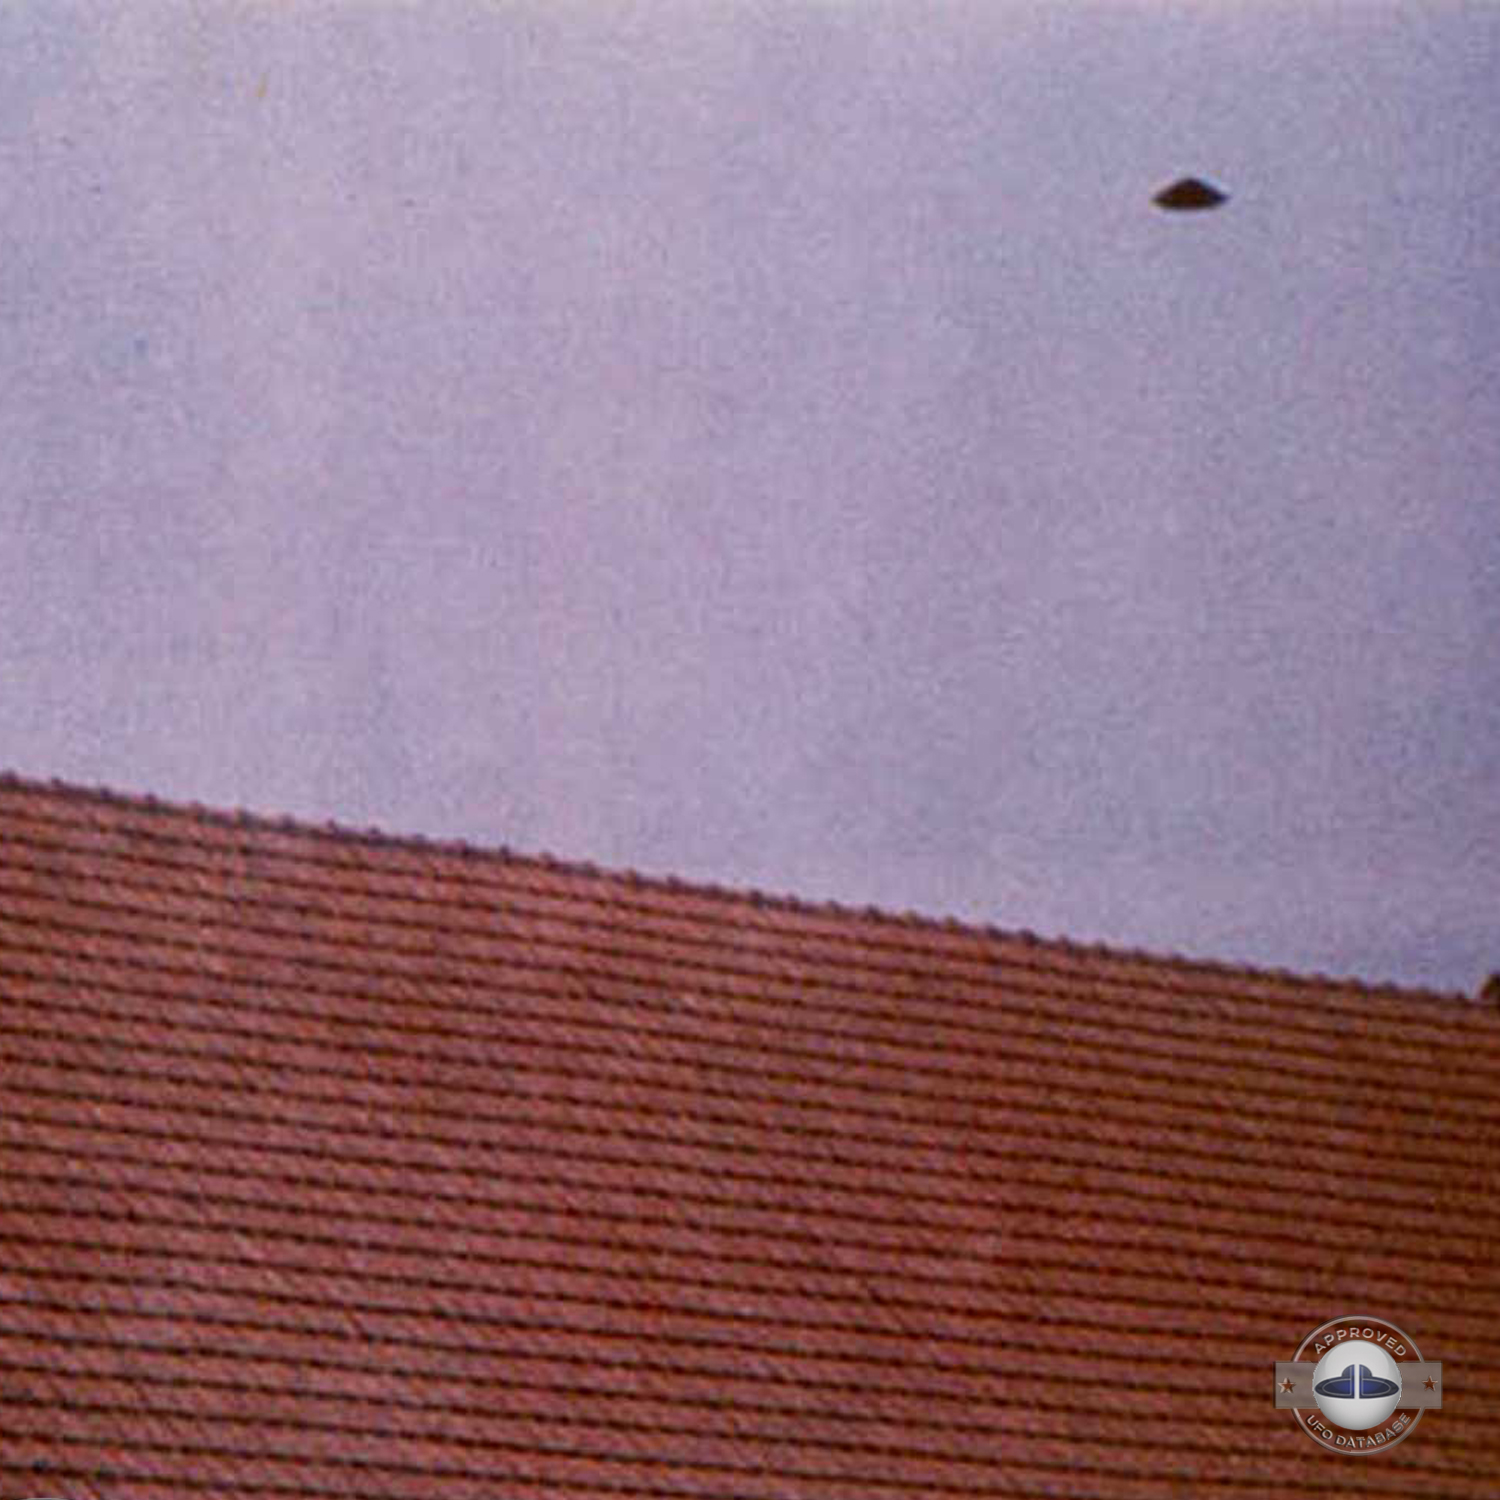 UFO seen over a roof of a house in Puerto Madryn in Argentina 1975 UFO Picture #28-2